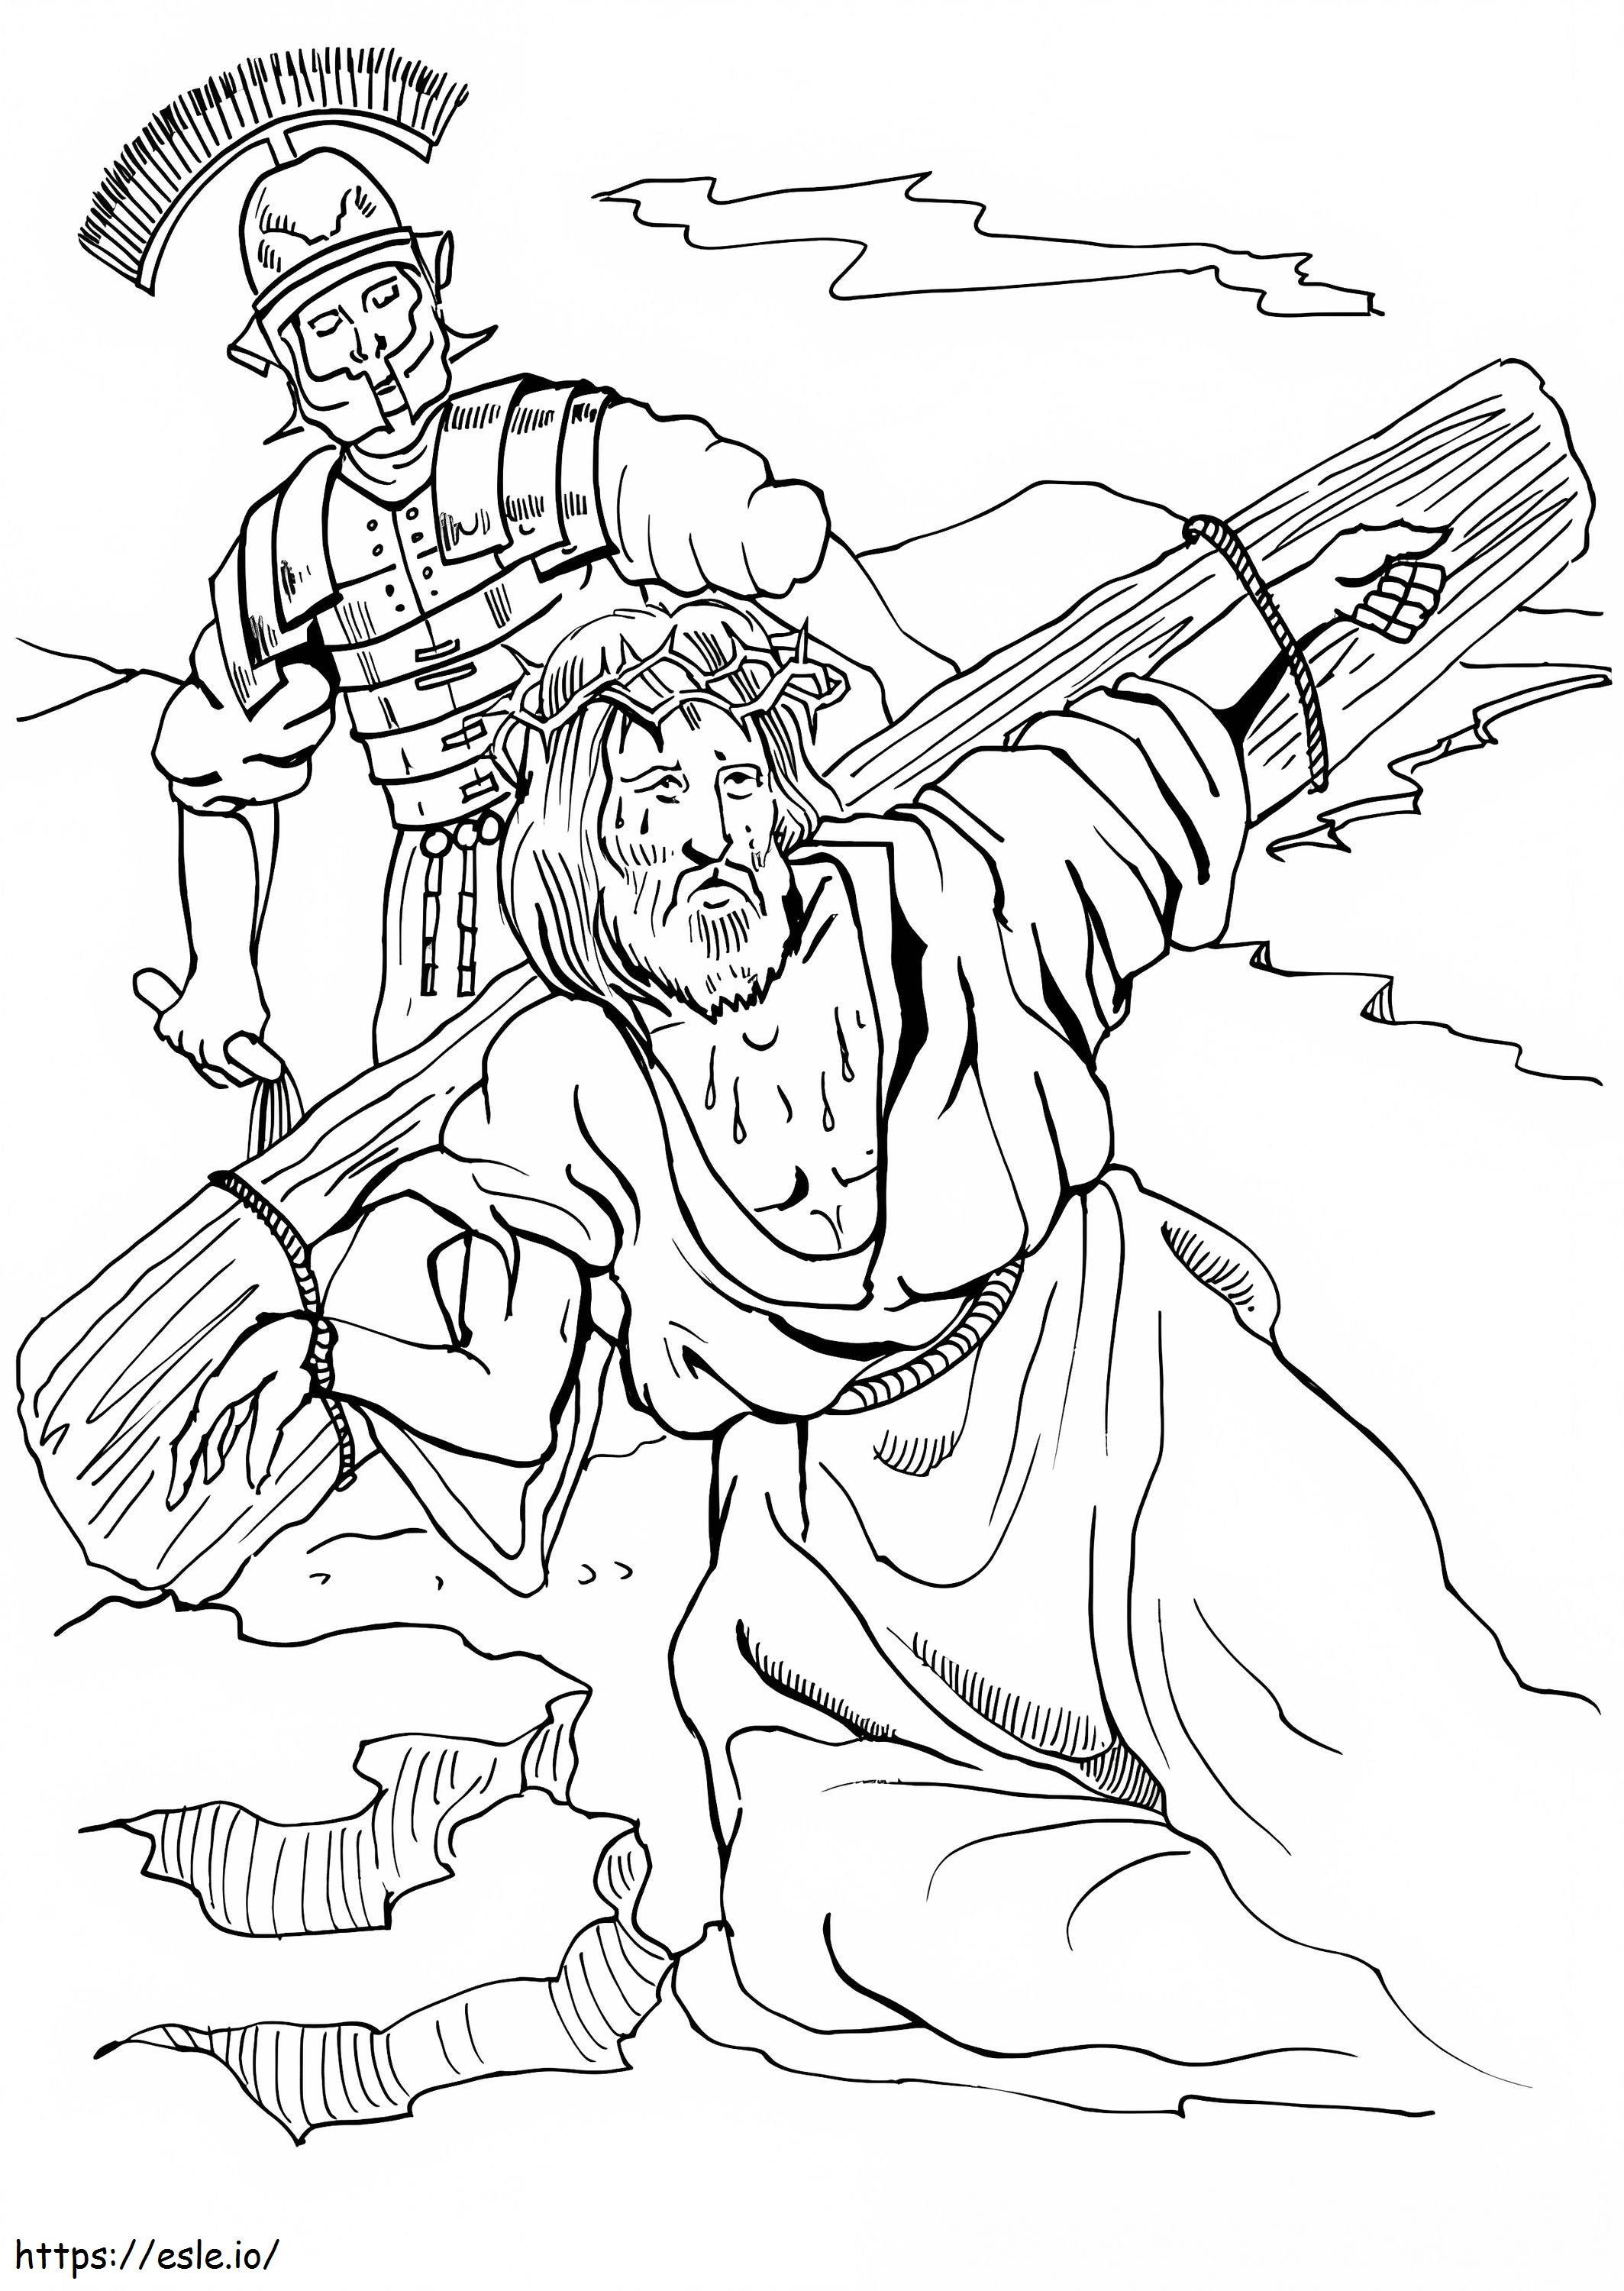 Good Friday 14 coloring page